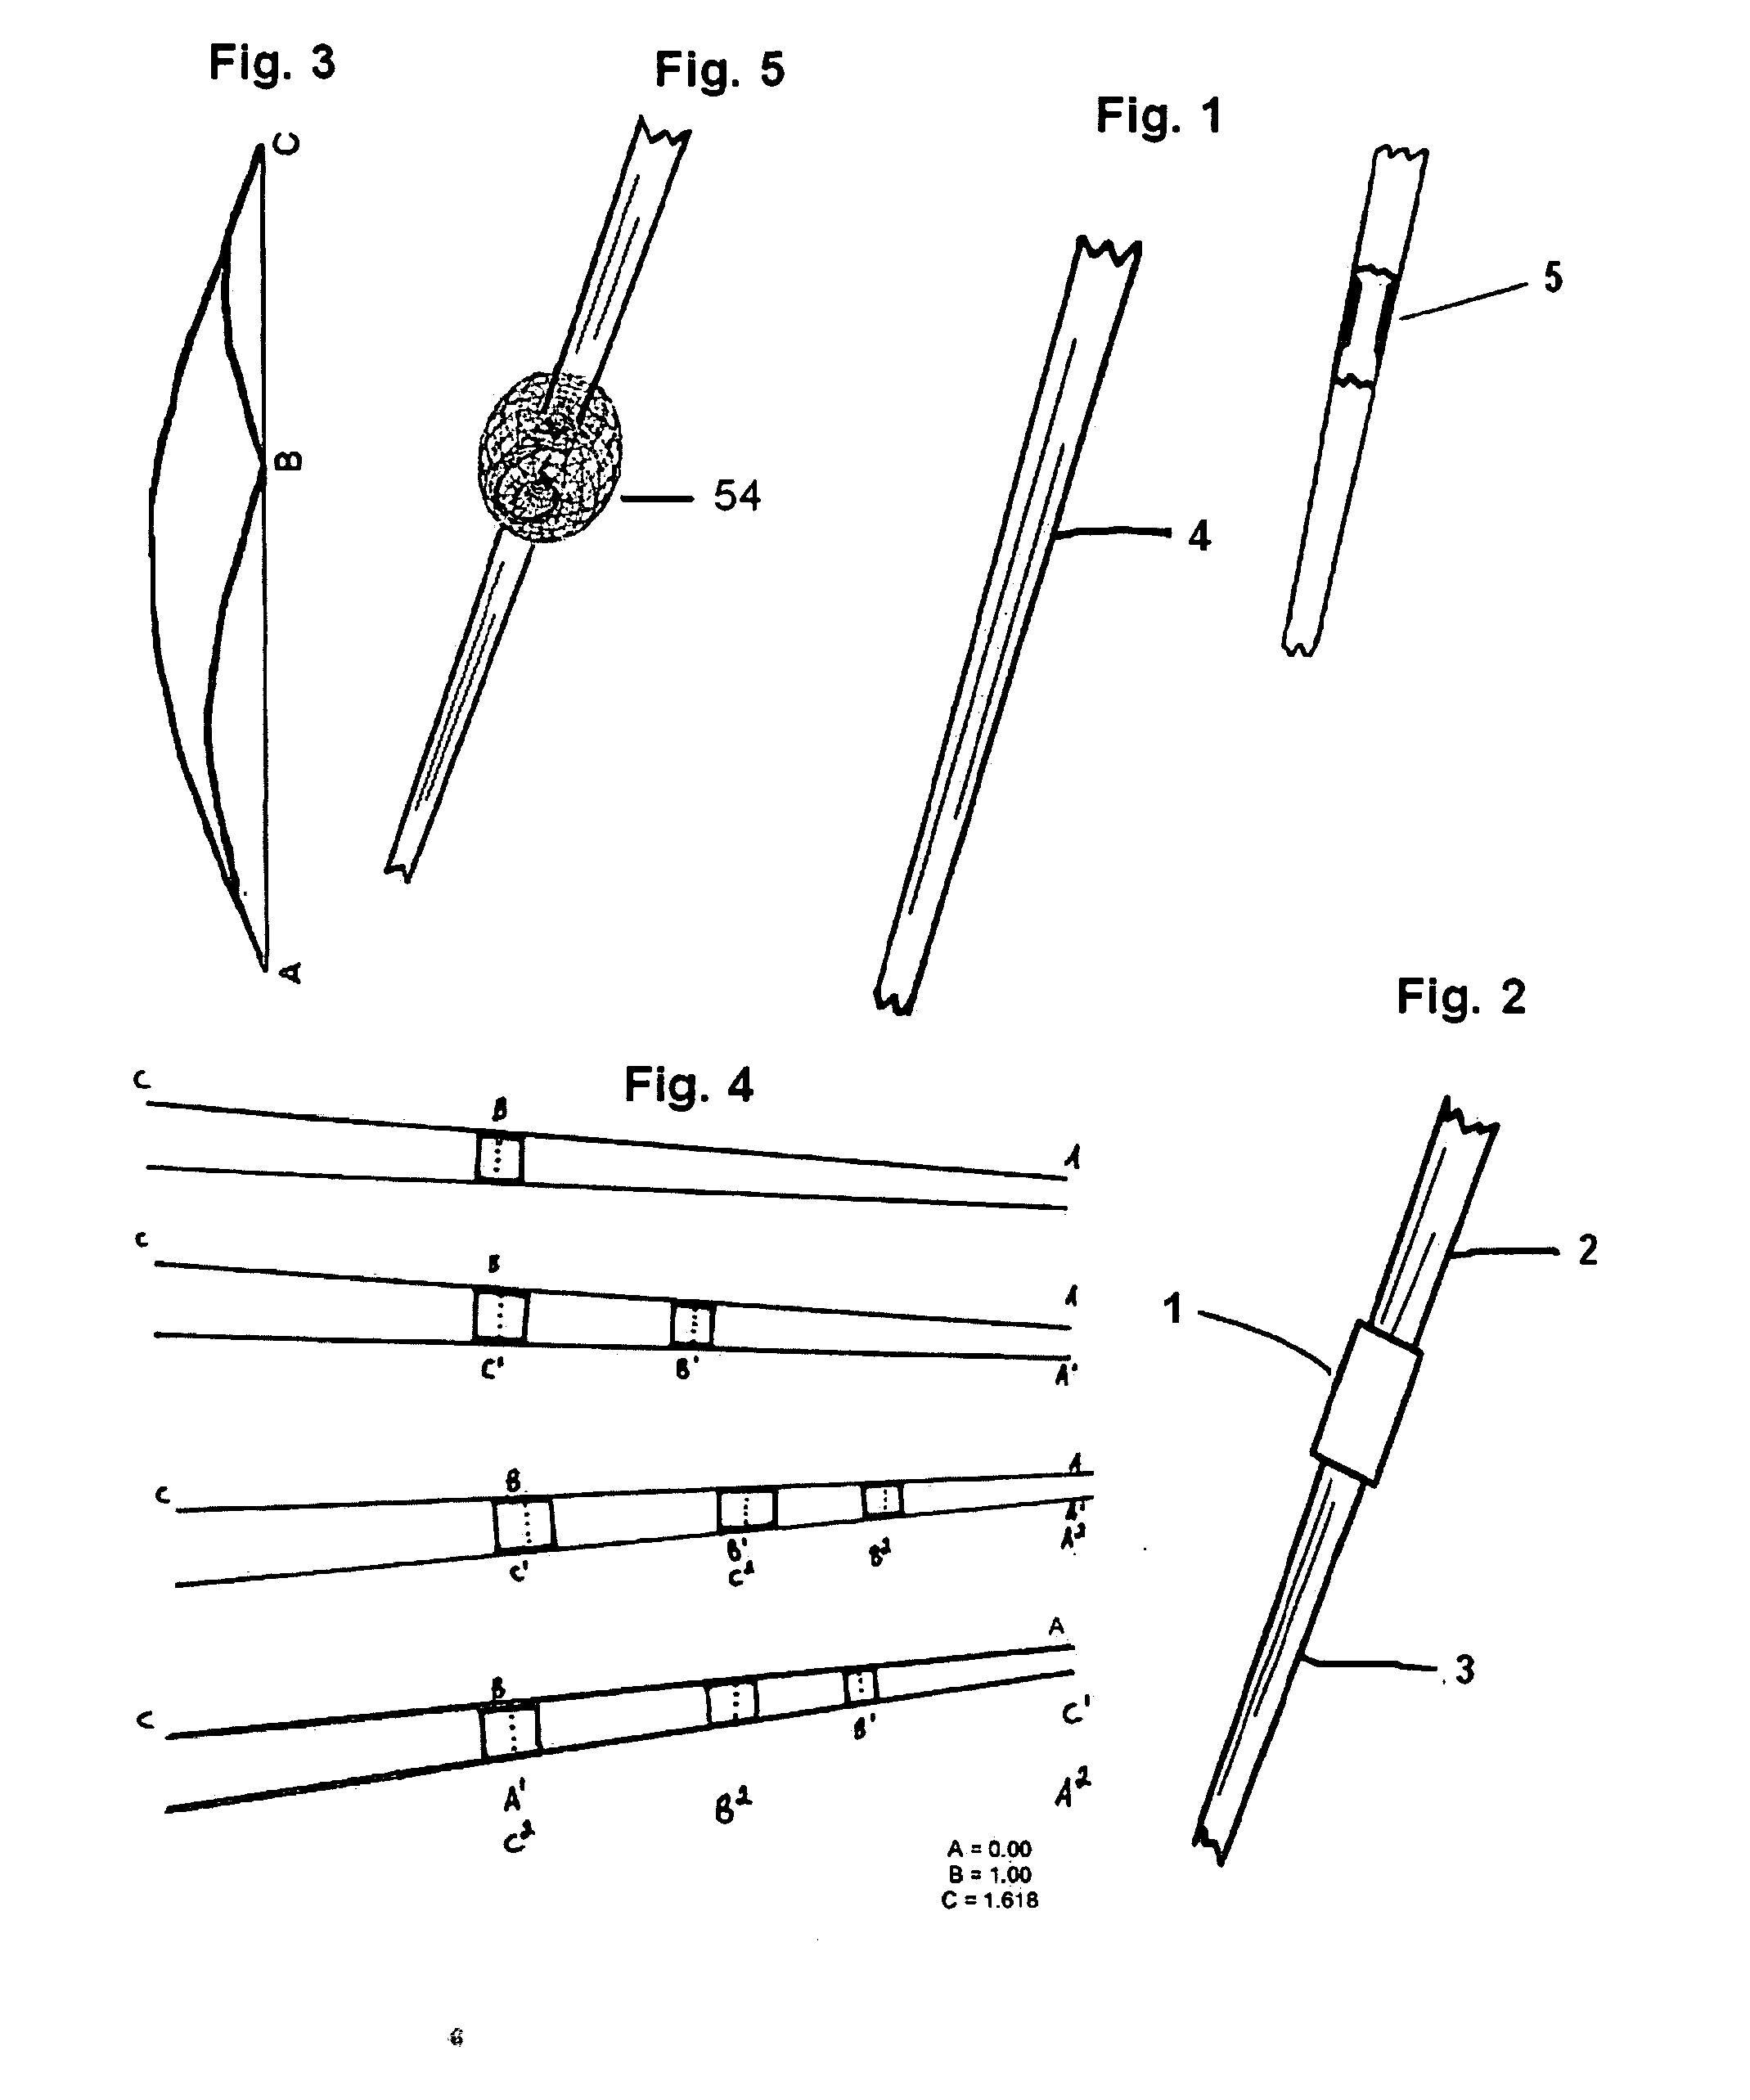 Method and apparatus for the exploitation of piezoelectric and other effects in carbon-based life forms